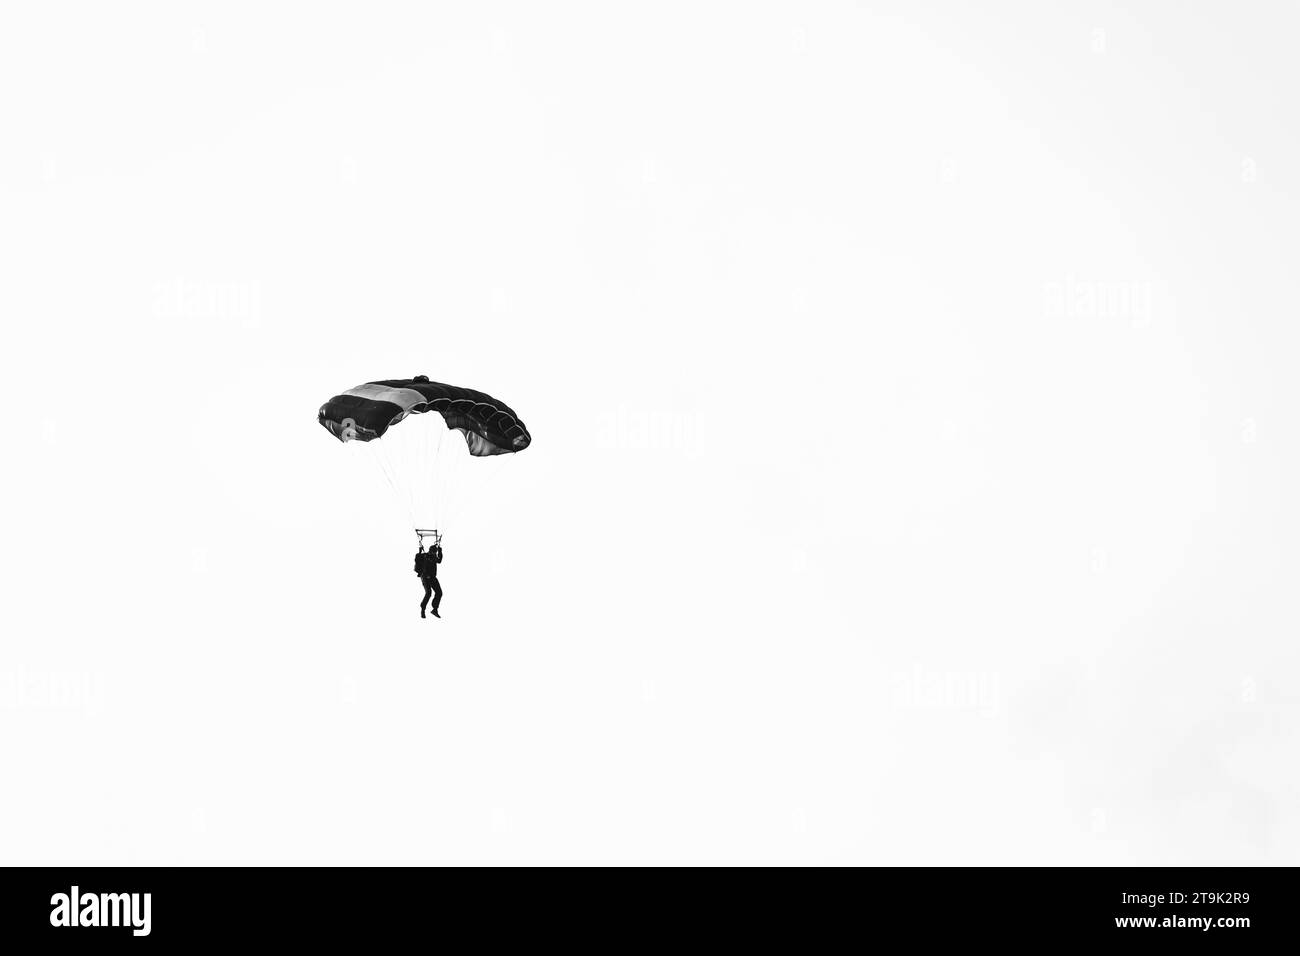 Abstract minimal picture with a parachute jumper on a white background. Stock Photo